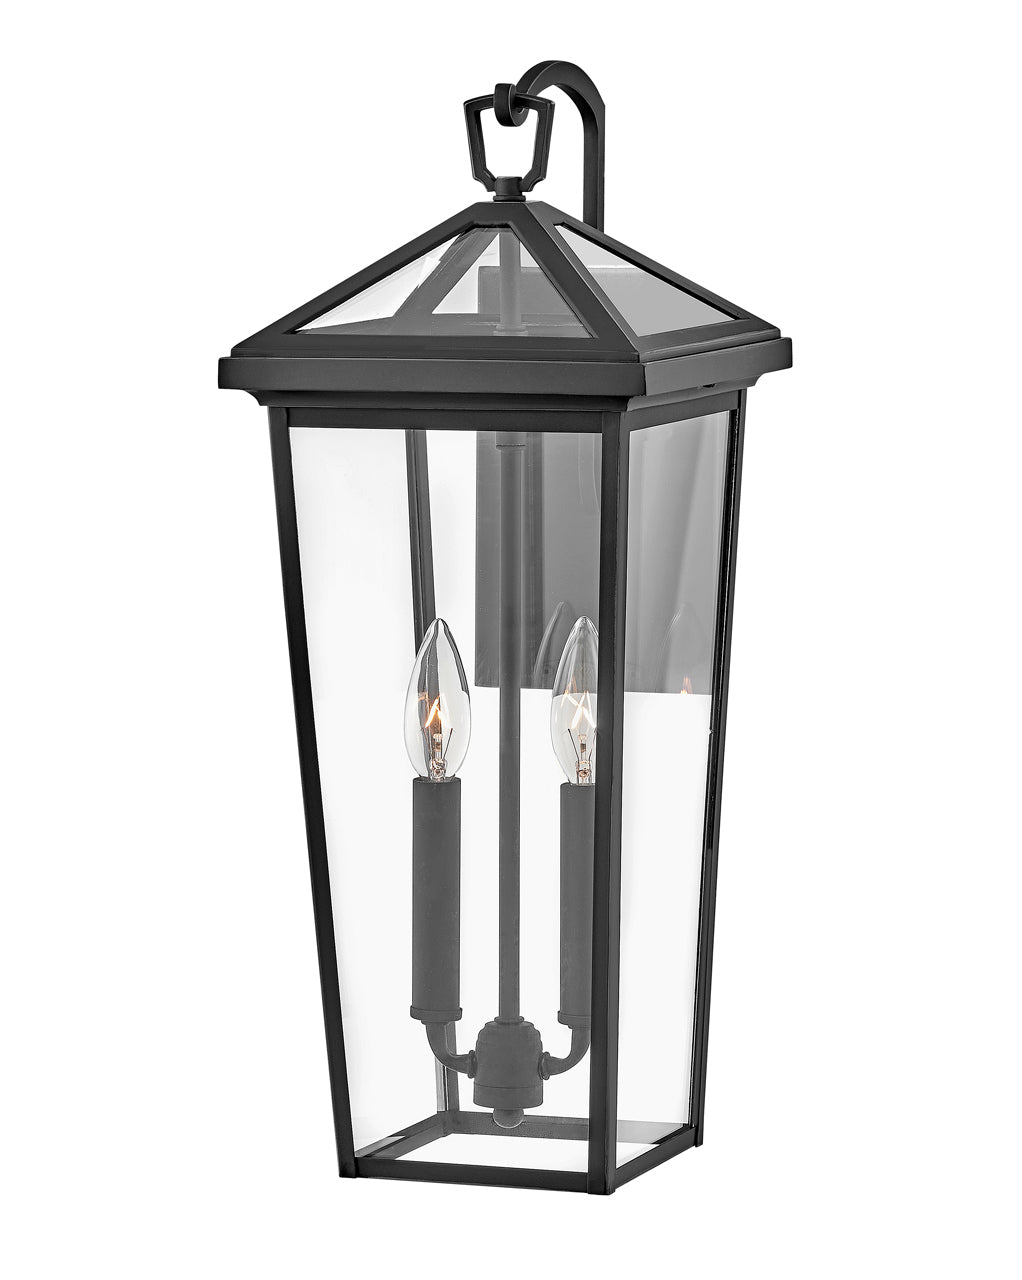 OUTDOOR ALFORD PLACE Wall Mount Lantern Outdoor l Wall Hinkley Museum Black 9.0x8.0x20.0 